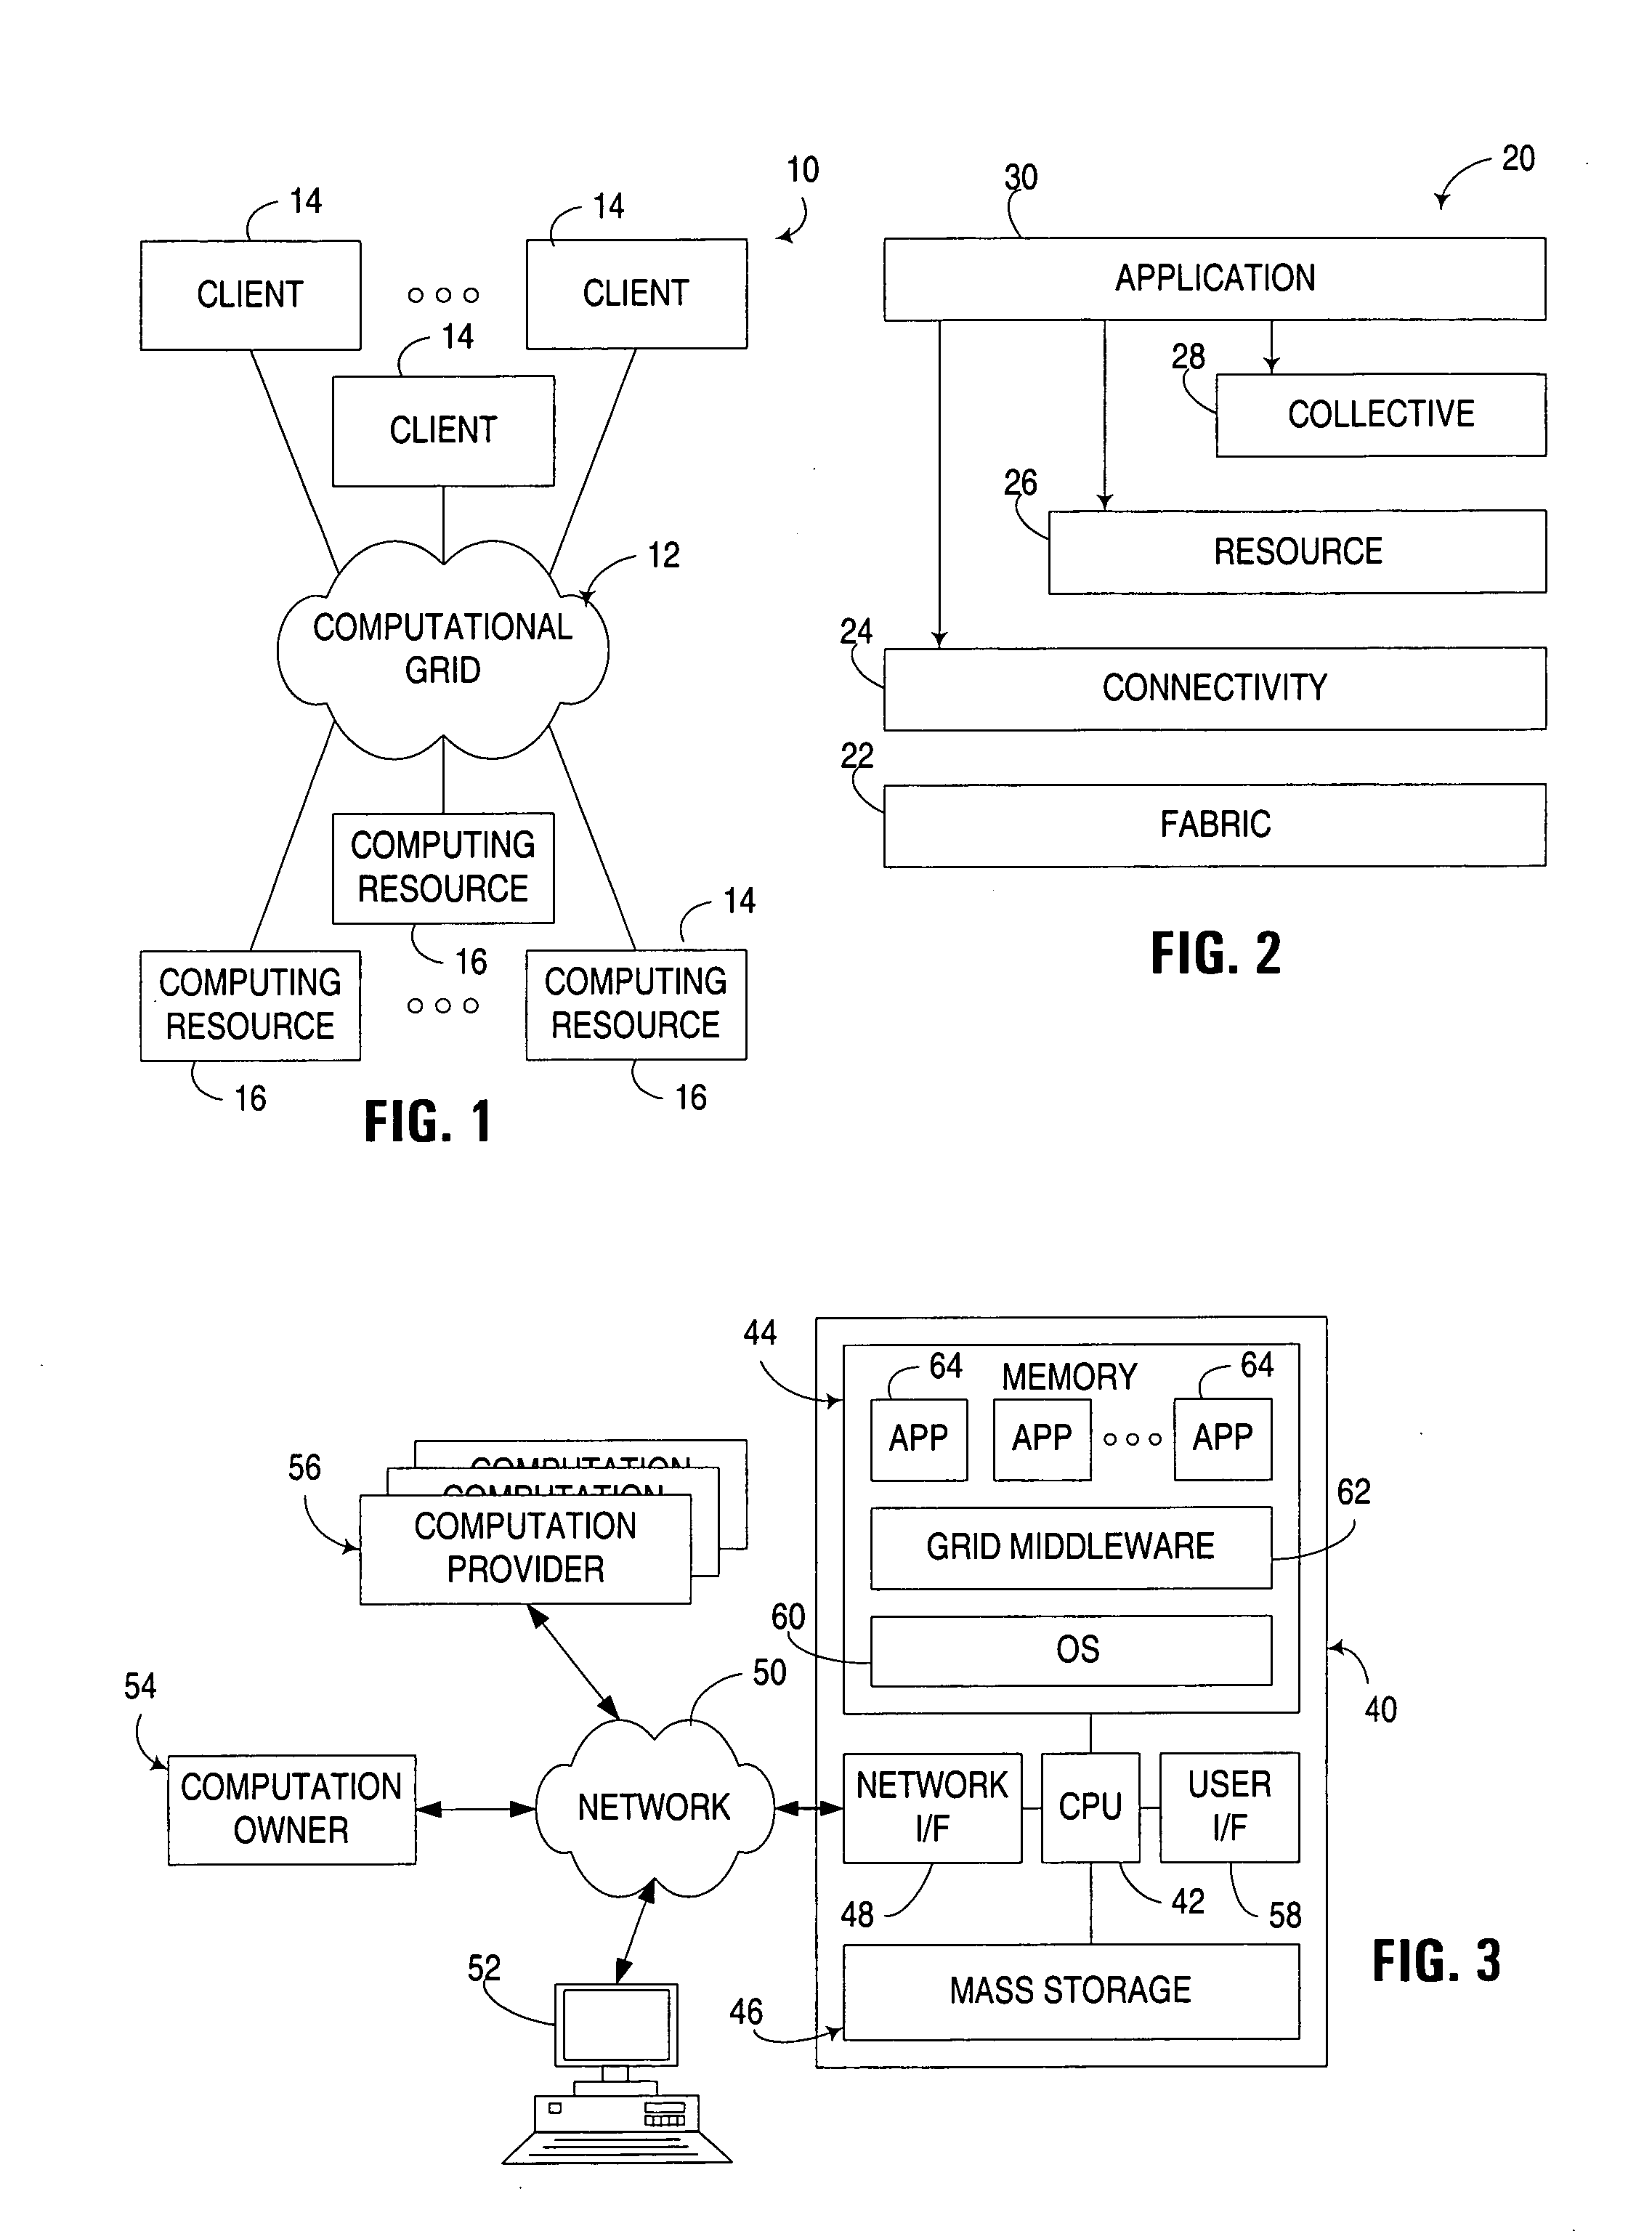 Distributed computation in untrusted computing environments using distractive computational units